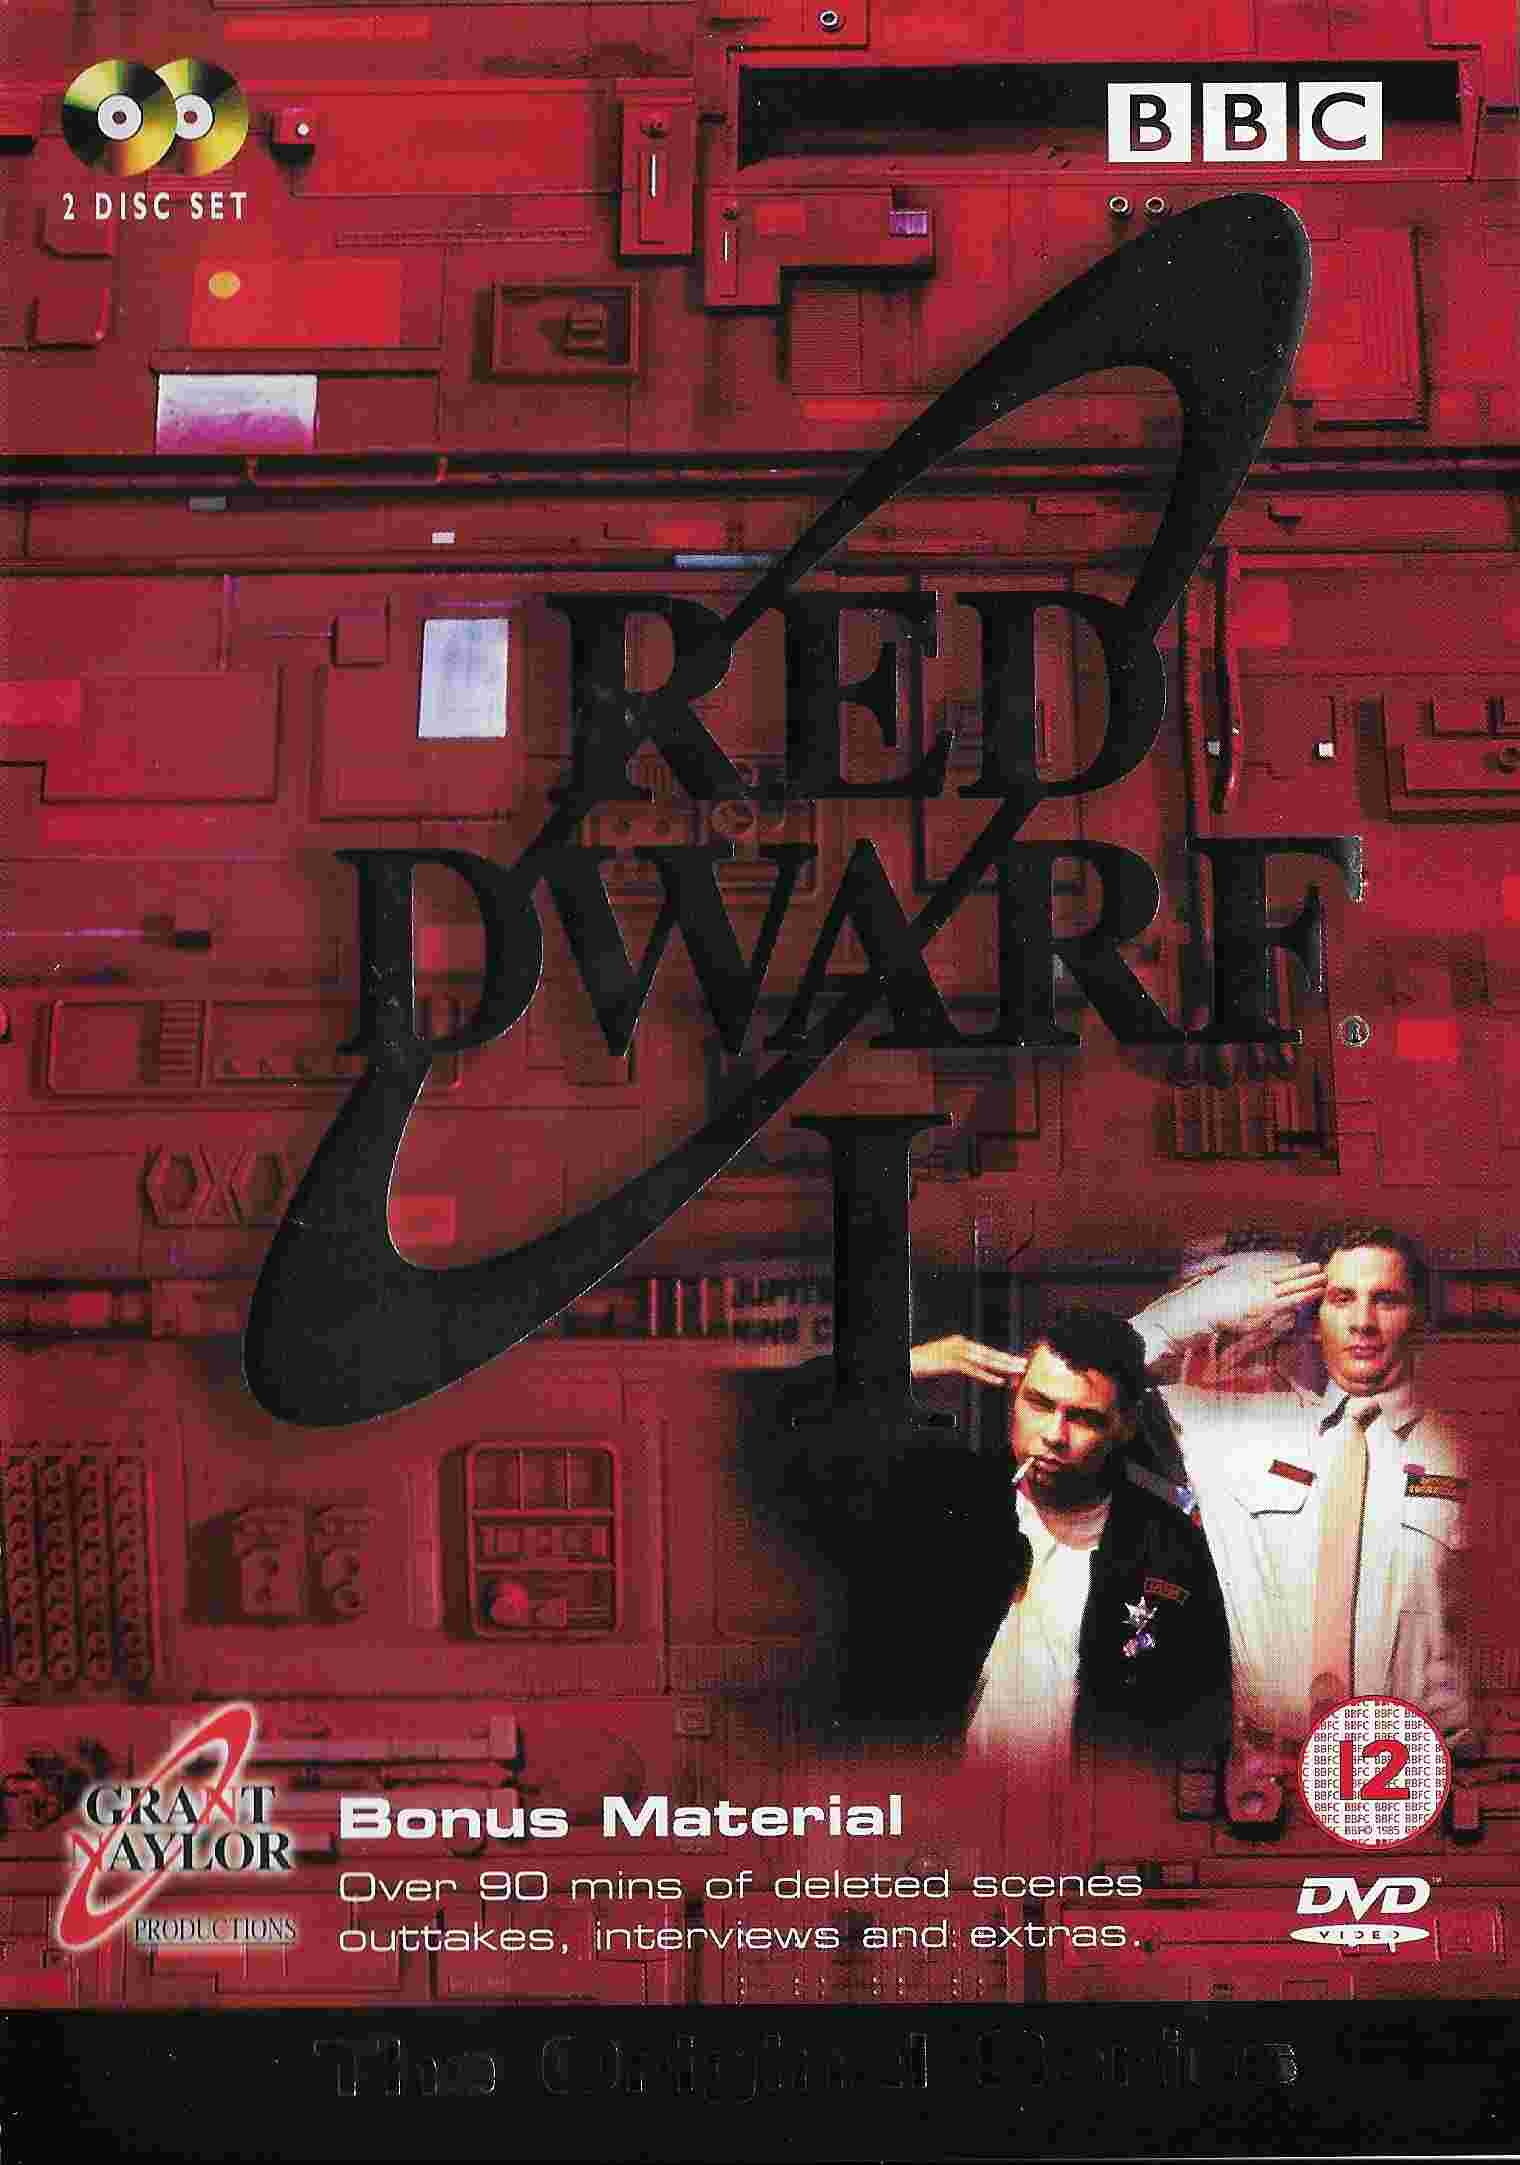 Picture of BBCDVD 1117 Red dwarf - Series I by artist Rob Grant / Doug Naylor from the BBC dvds - Records and Tapes library